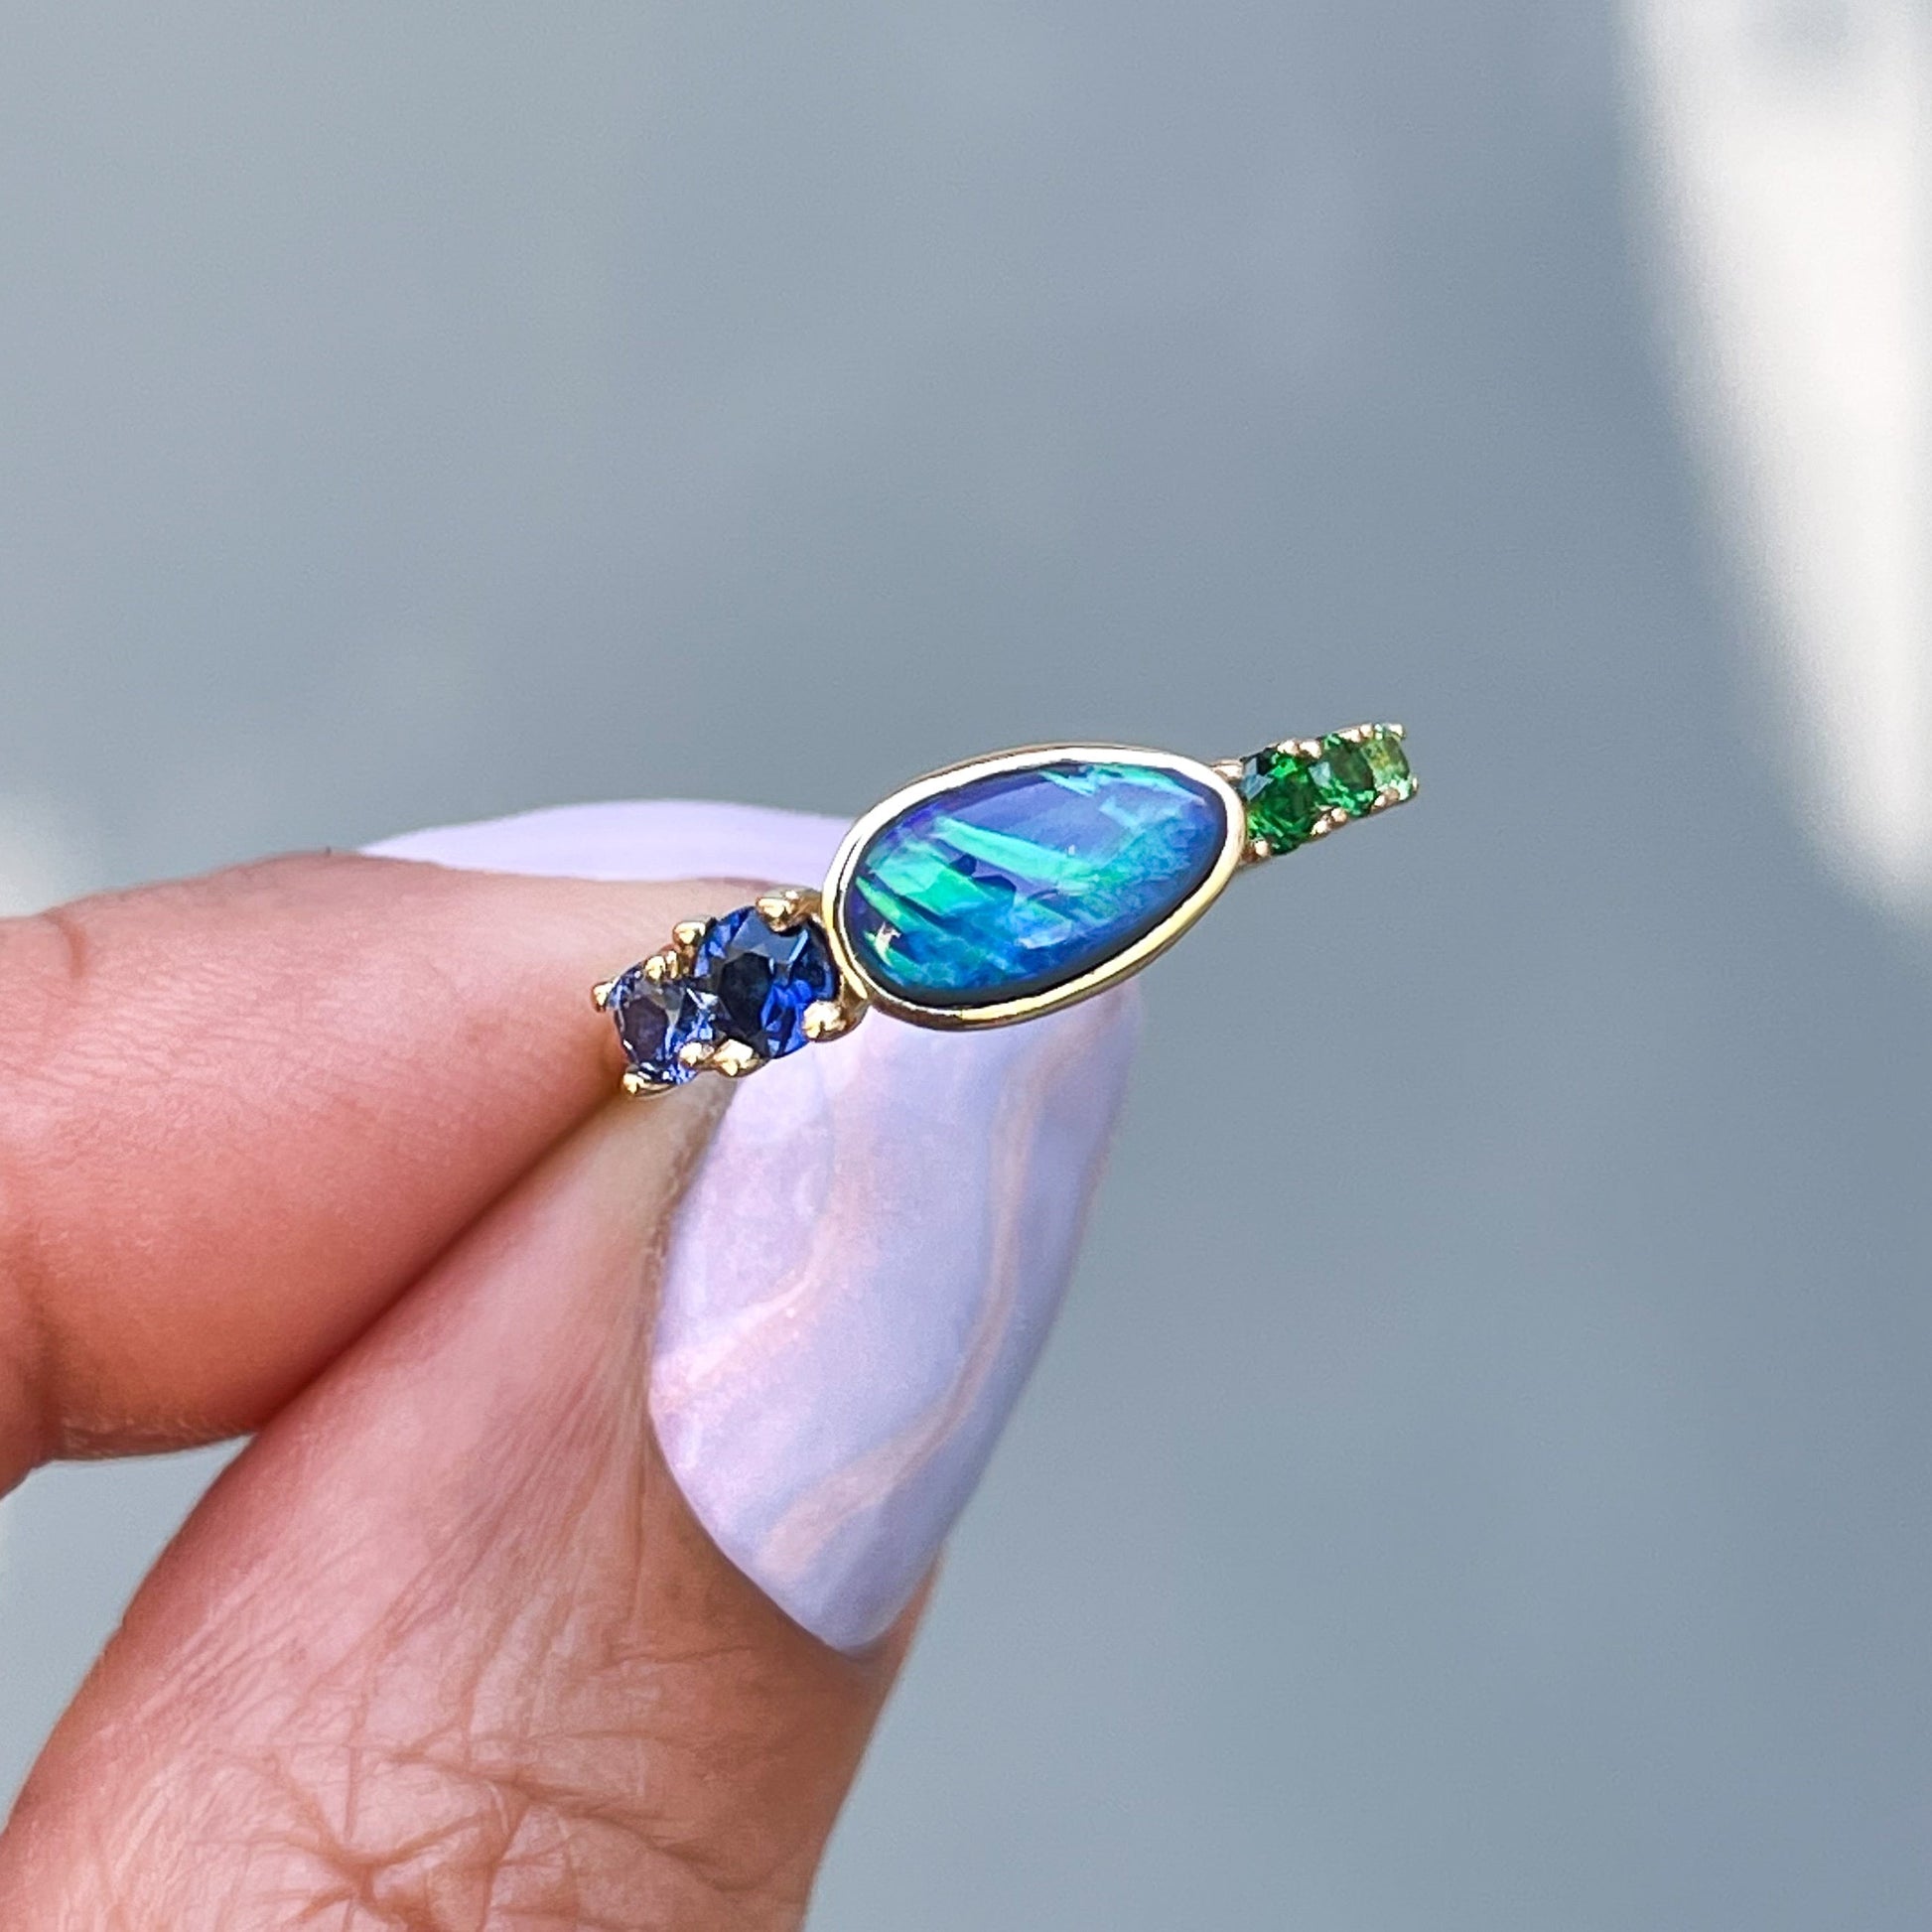 Black Opal Ring by NIXIN Jewelry held in shade. Real opal ring.